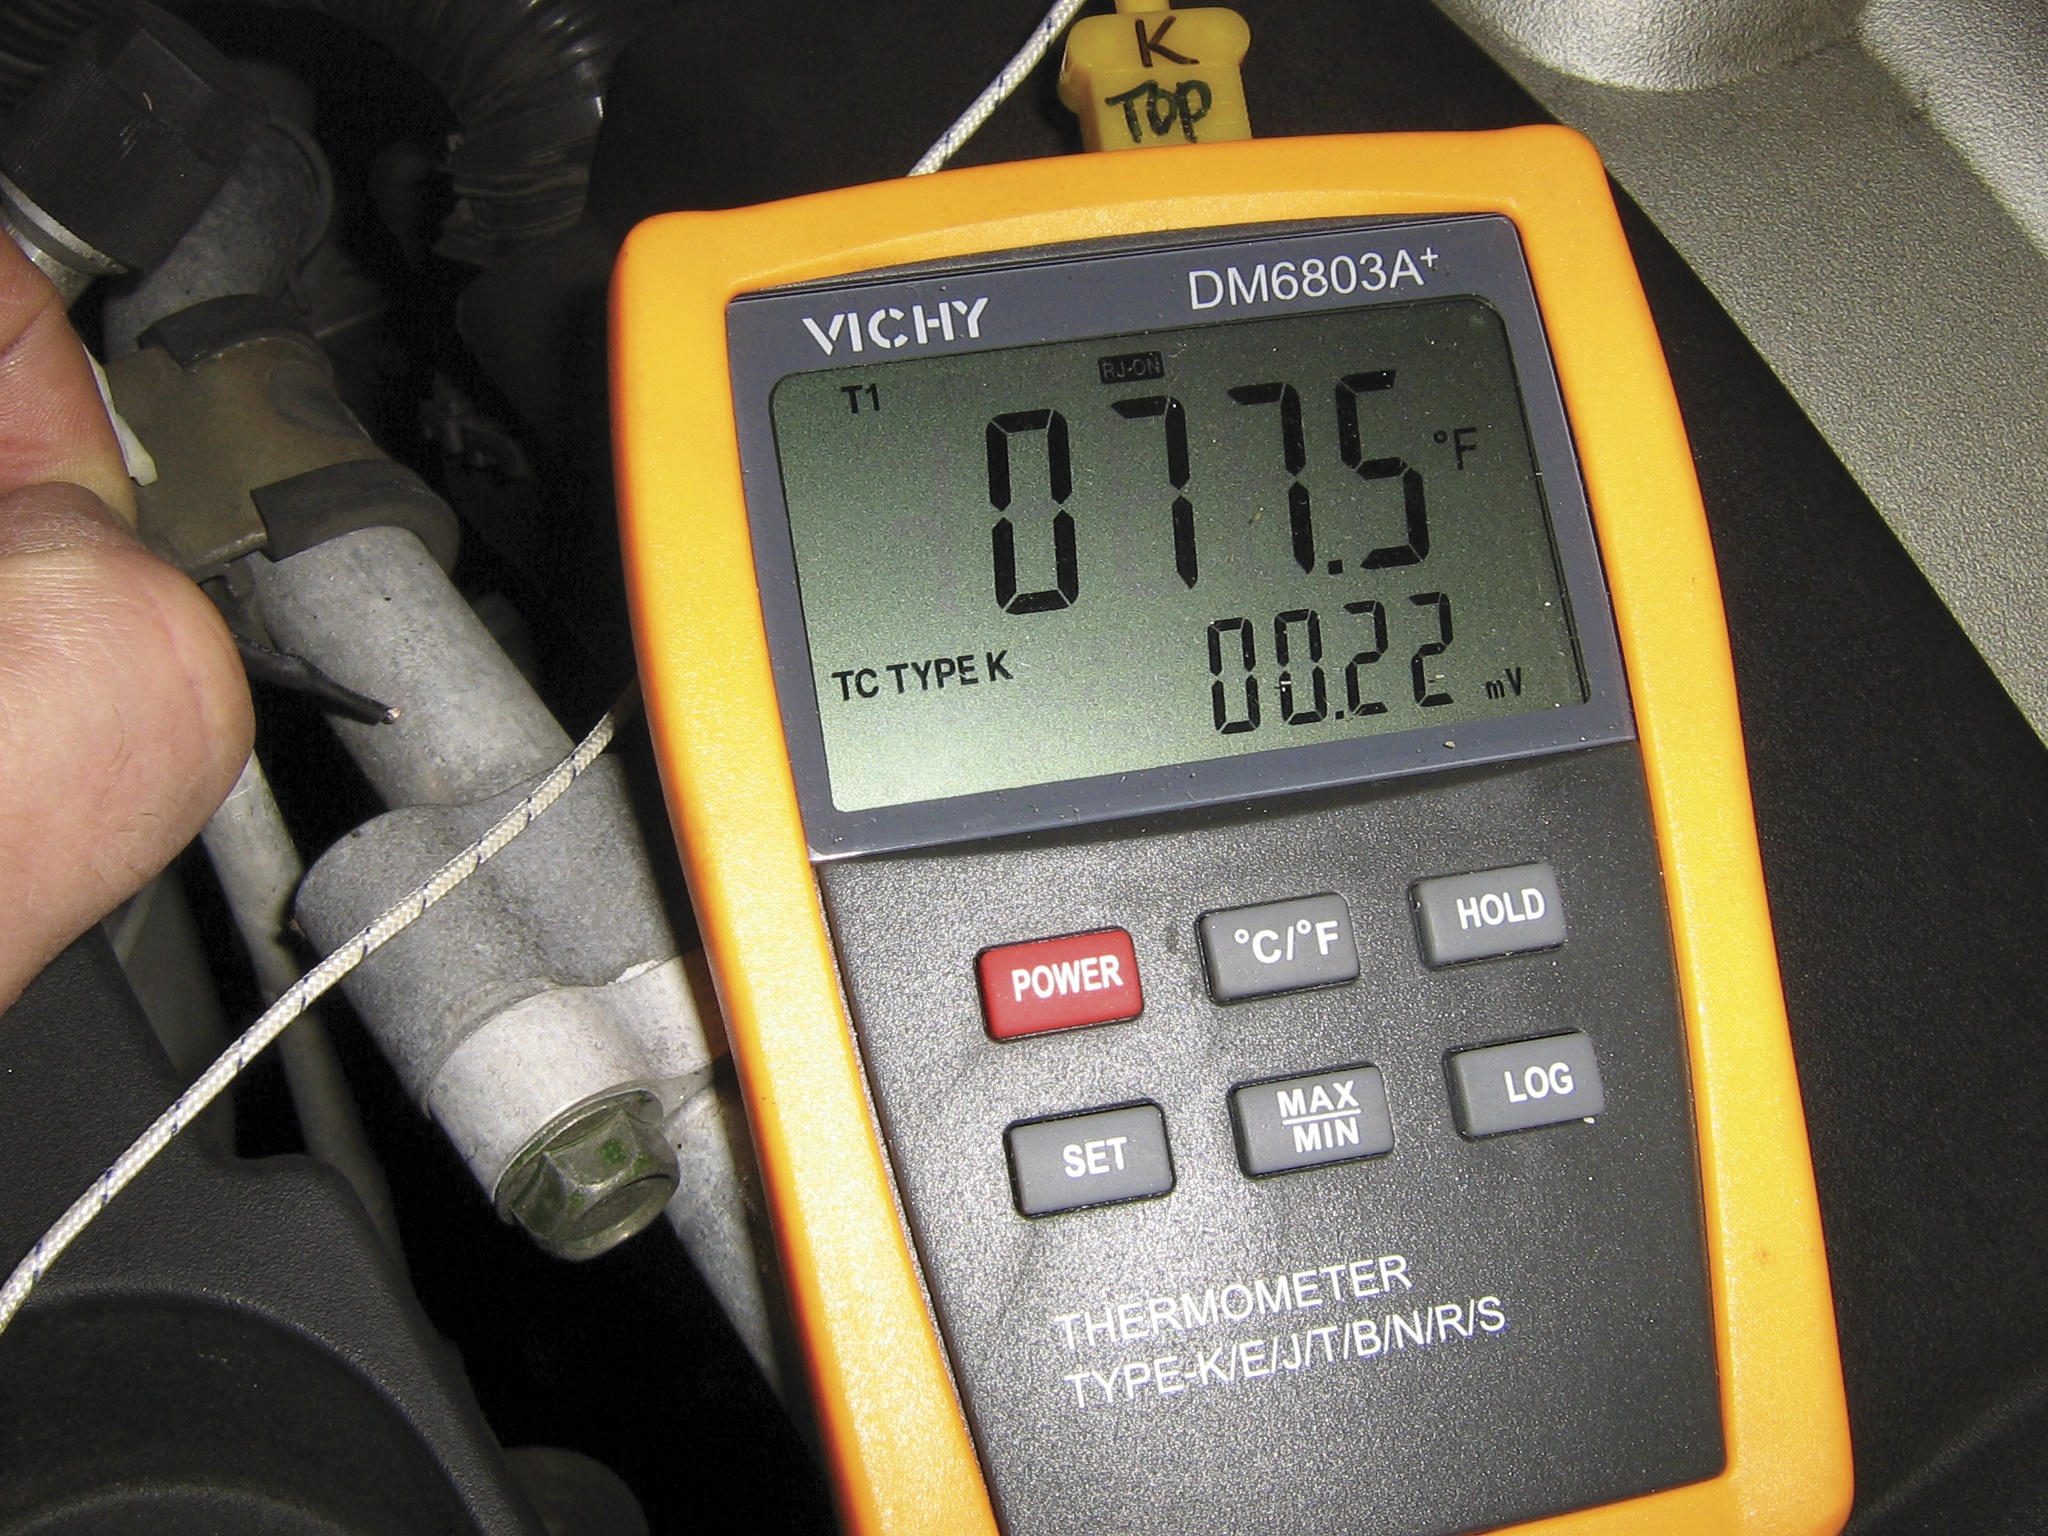 A contact pyrometer is a very useful tool for climate control diagnosis. An infrared thermometer can also be used, but reflective metallic surfaces or attempting to measure small areas can lead to inaccurate readings.